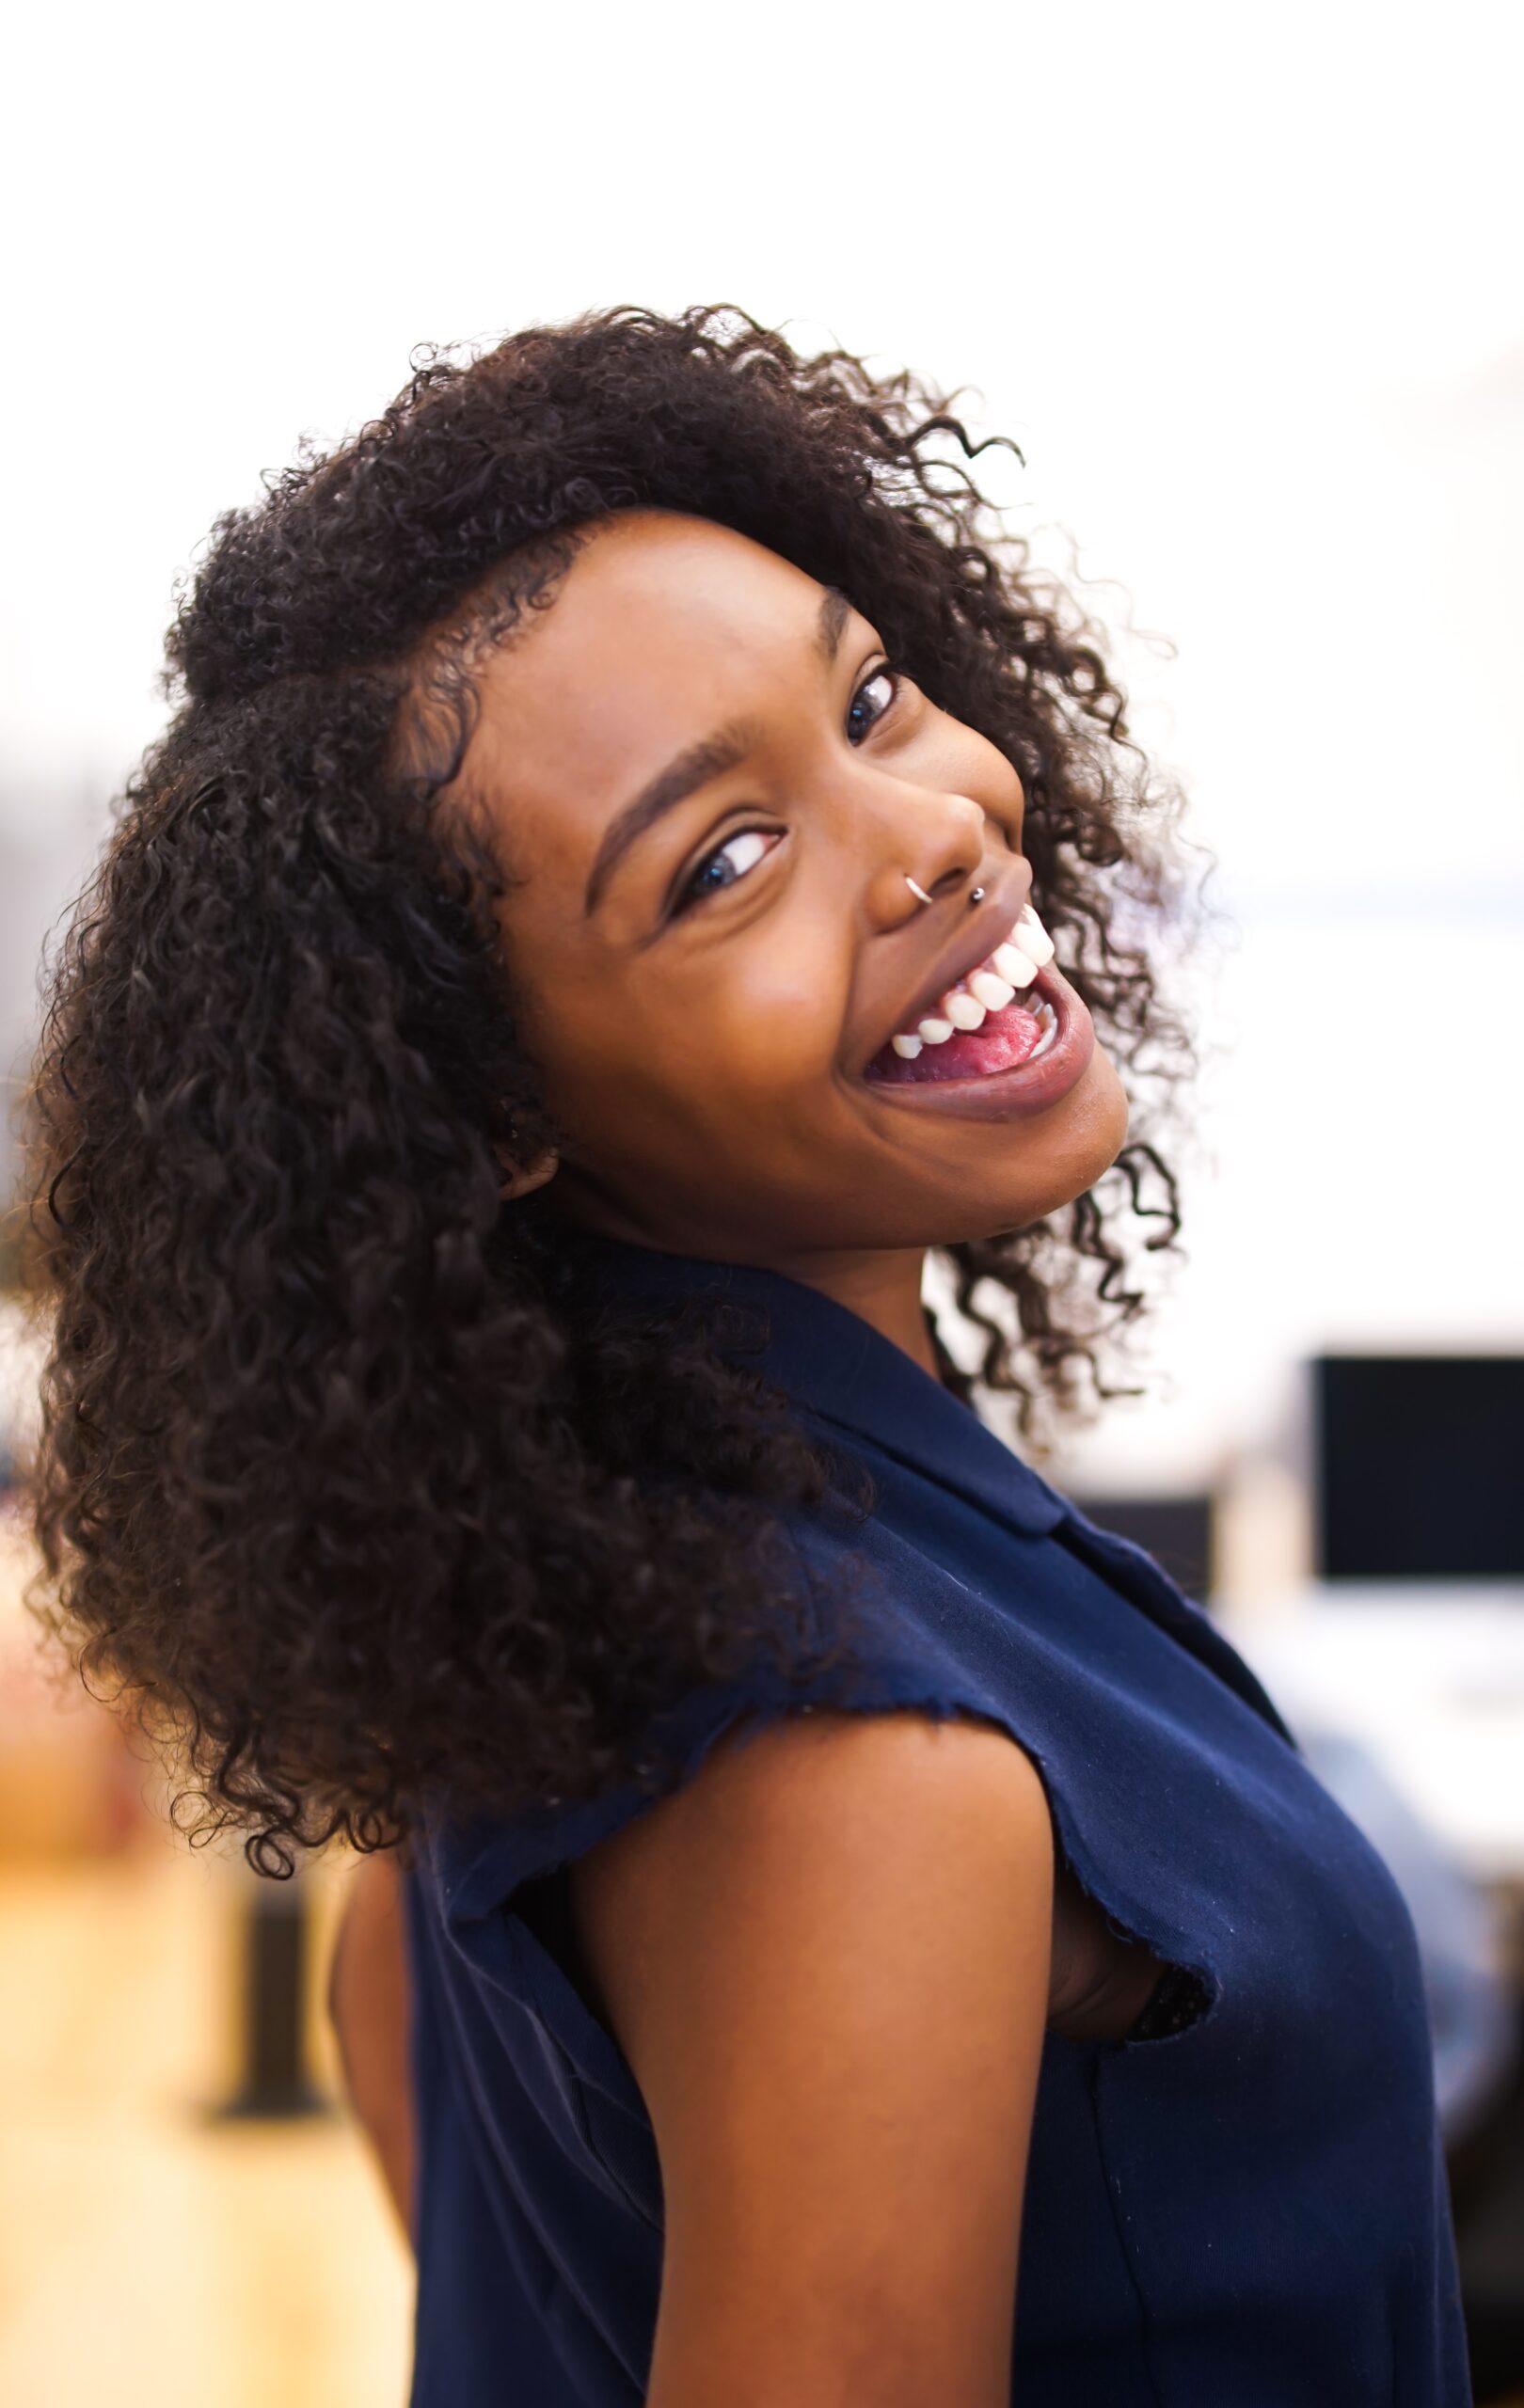 A Black woman smiles after finding great dentists in Dallas, TX